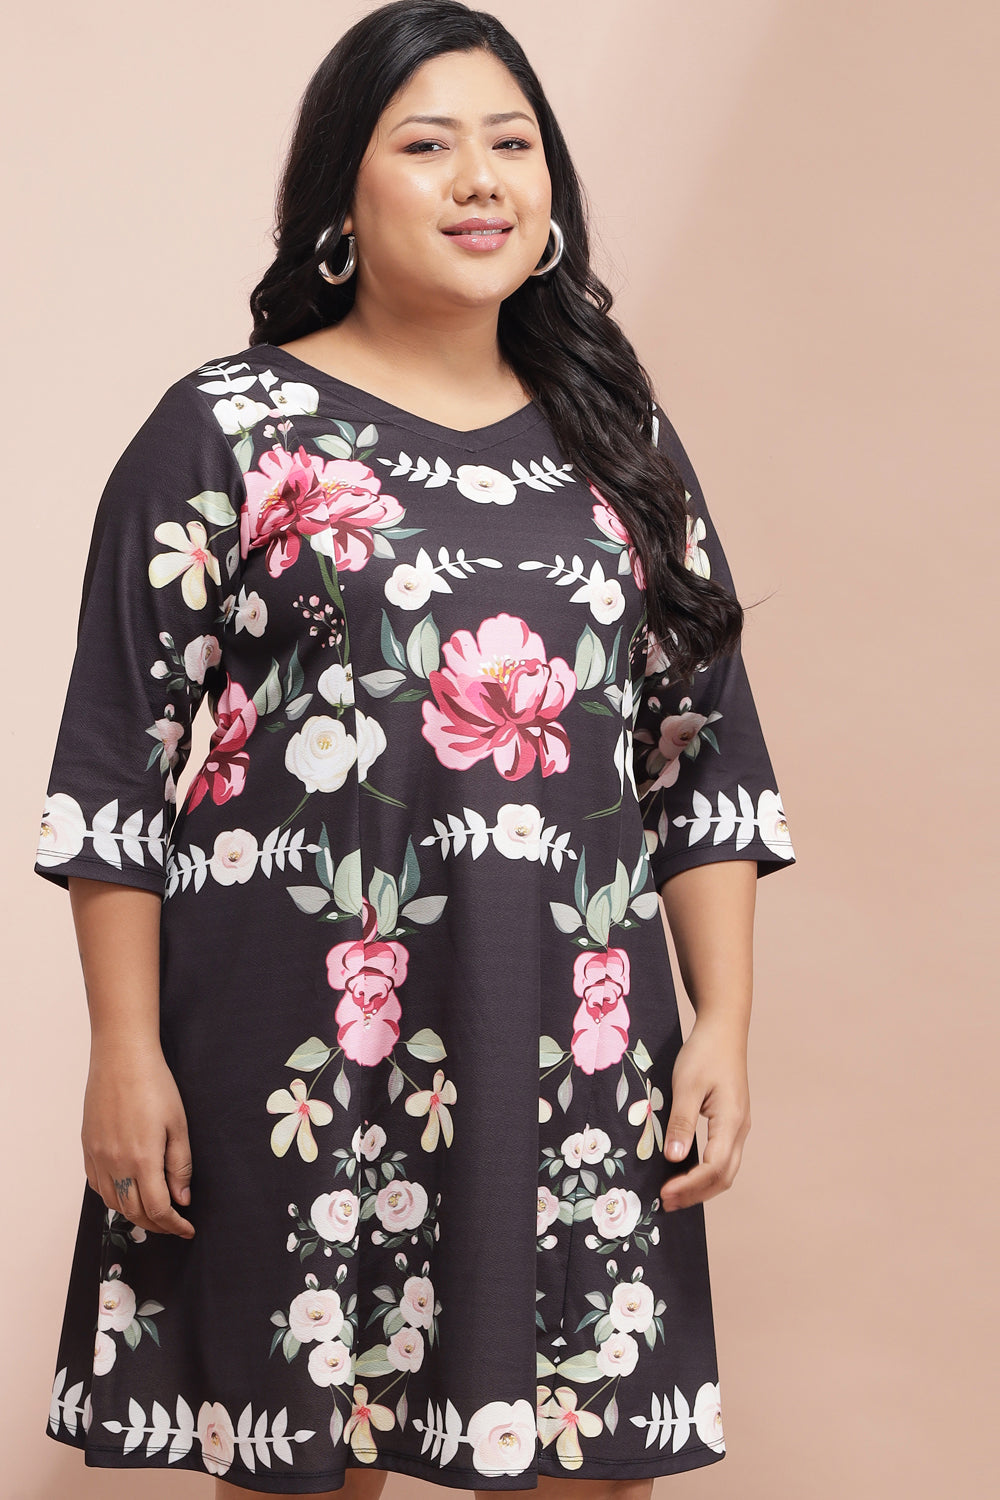 Black Bright Floral Printed Dress for Women